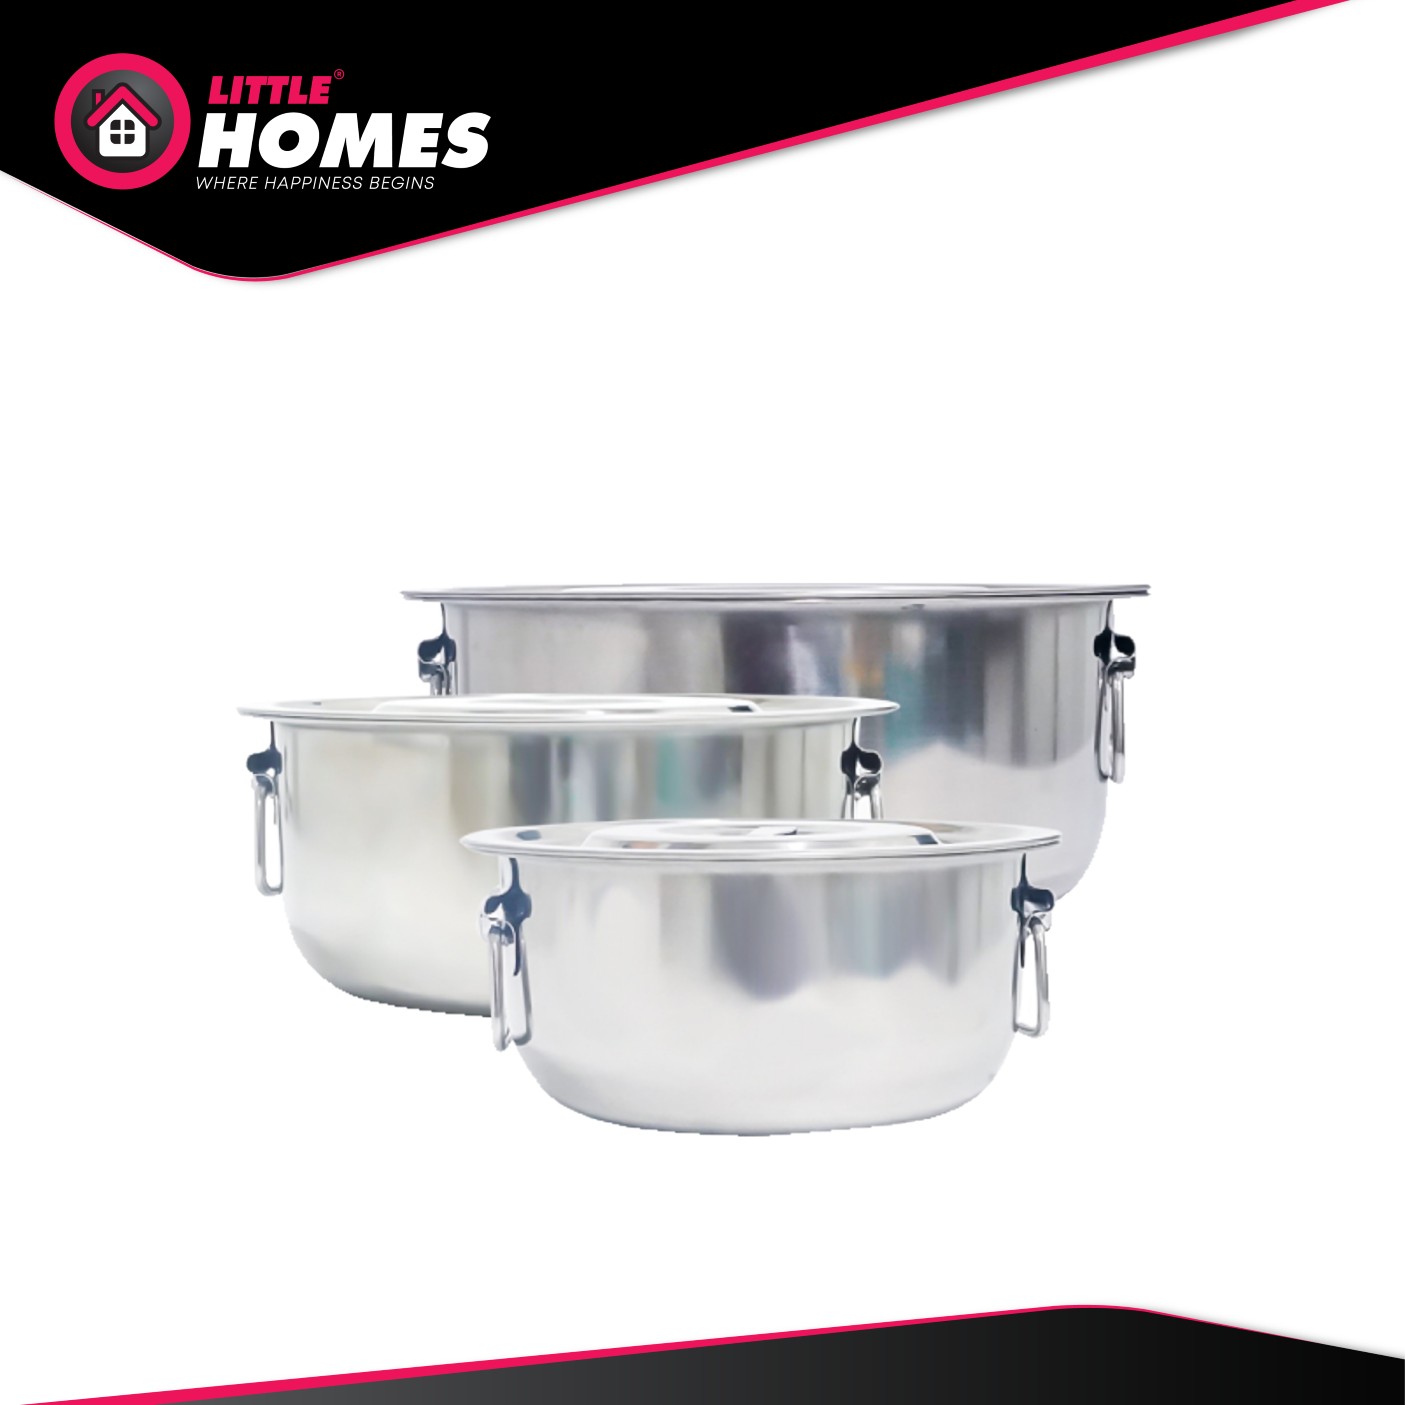 Little Homes Stainless Steel Indian Pot Multipurpose Stock Pot 3 Sizes Set with Carrier & Lids (3.8L, 6.8L & 10L)